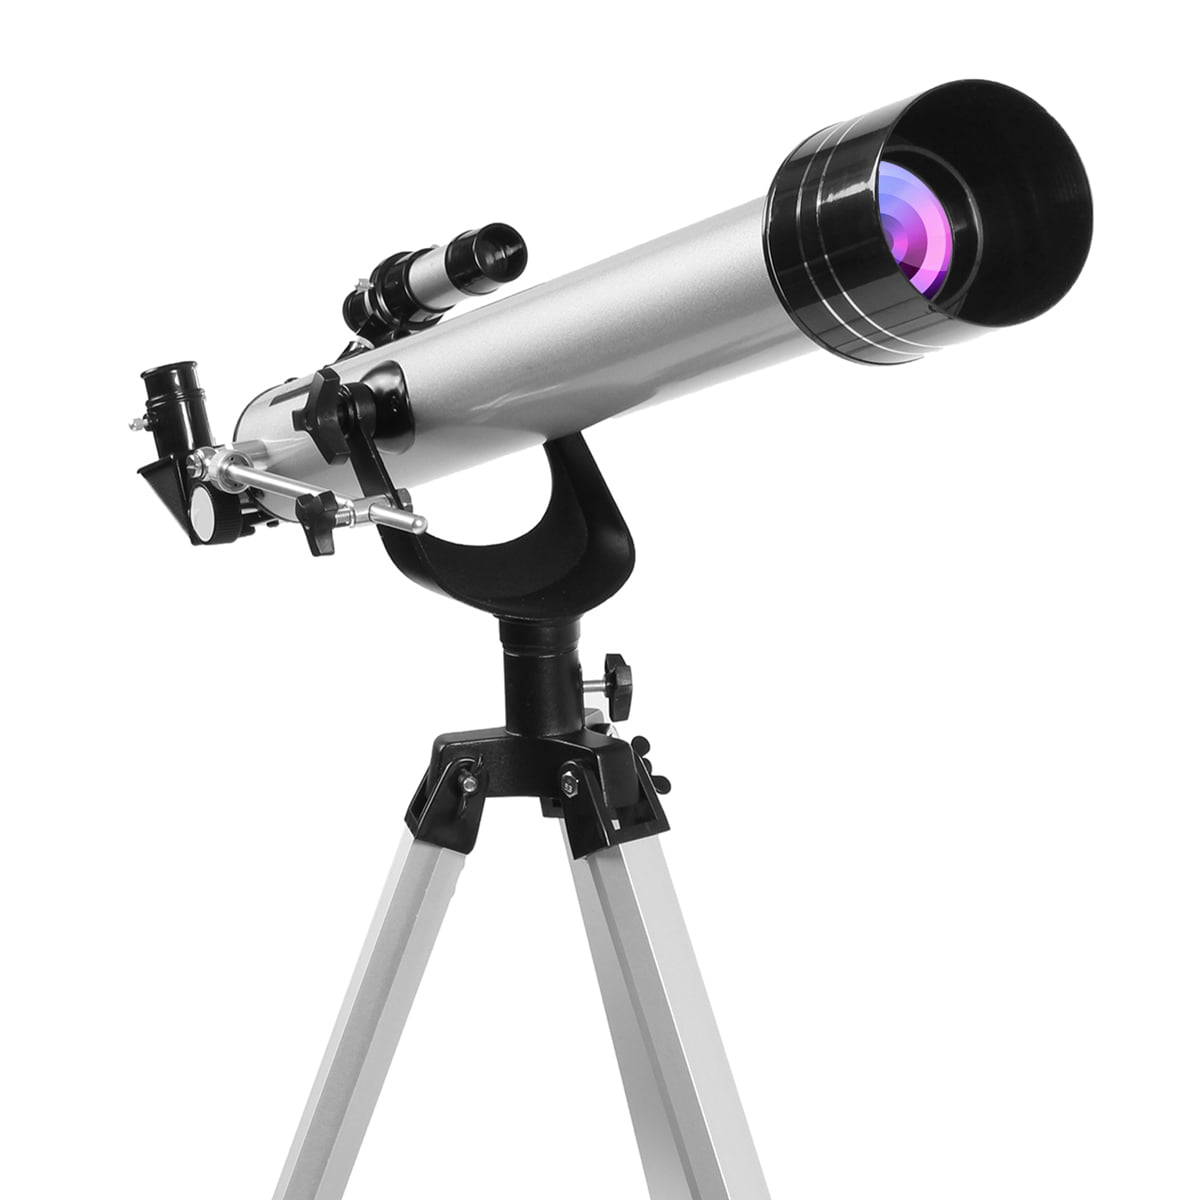 DWHJ Telescopes for Astronomy Beginners 70mm Aperture 300mm Refractor Telescope for Astronomy Portable Travel Telescope with with Phone Adapter/Tripod/Multi-Coated Optics for Kids Adults 